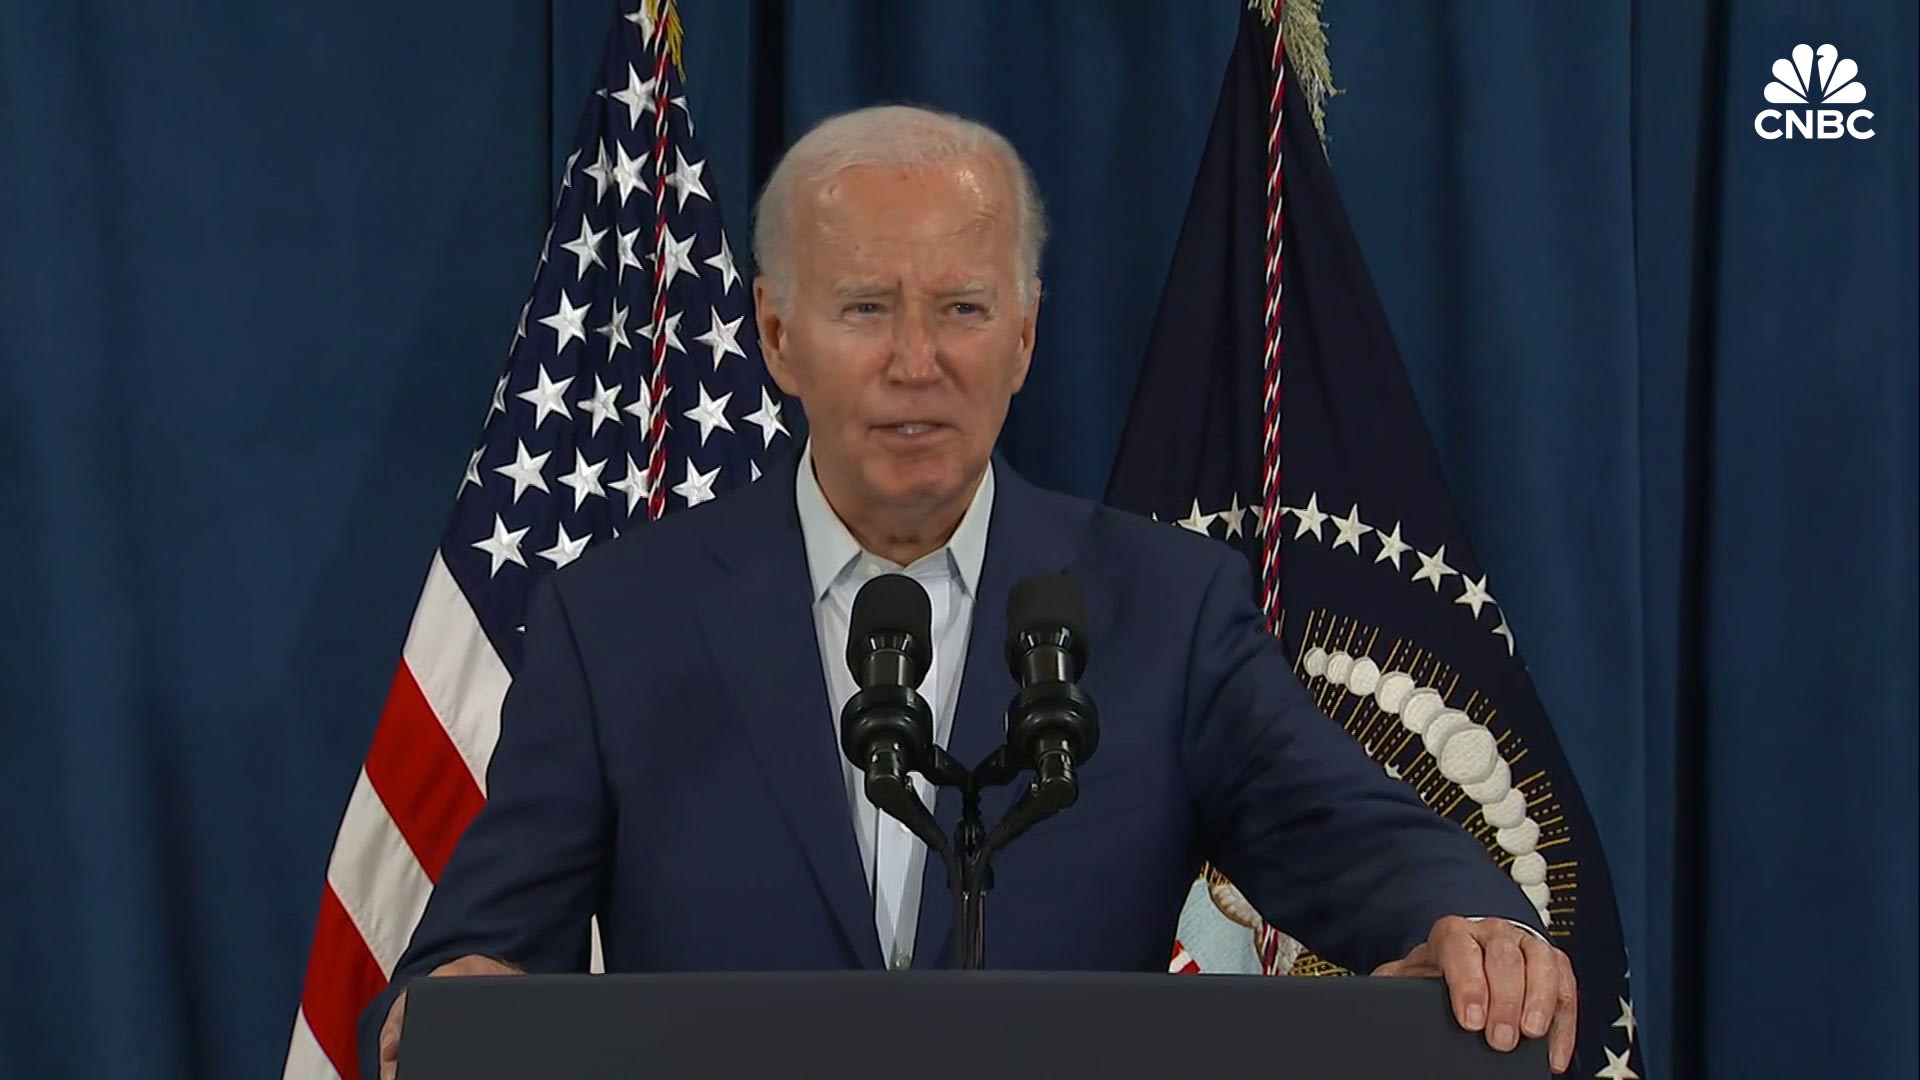 President Biden condemns violence after Former President Trump injured in shooting at campaign rally